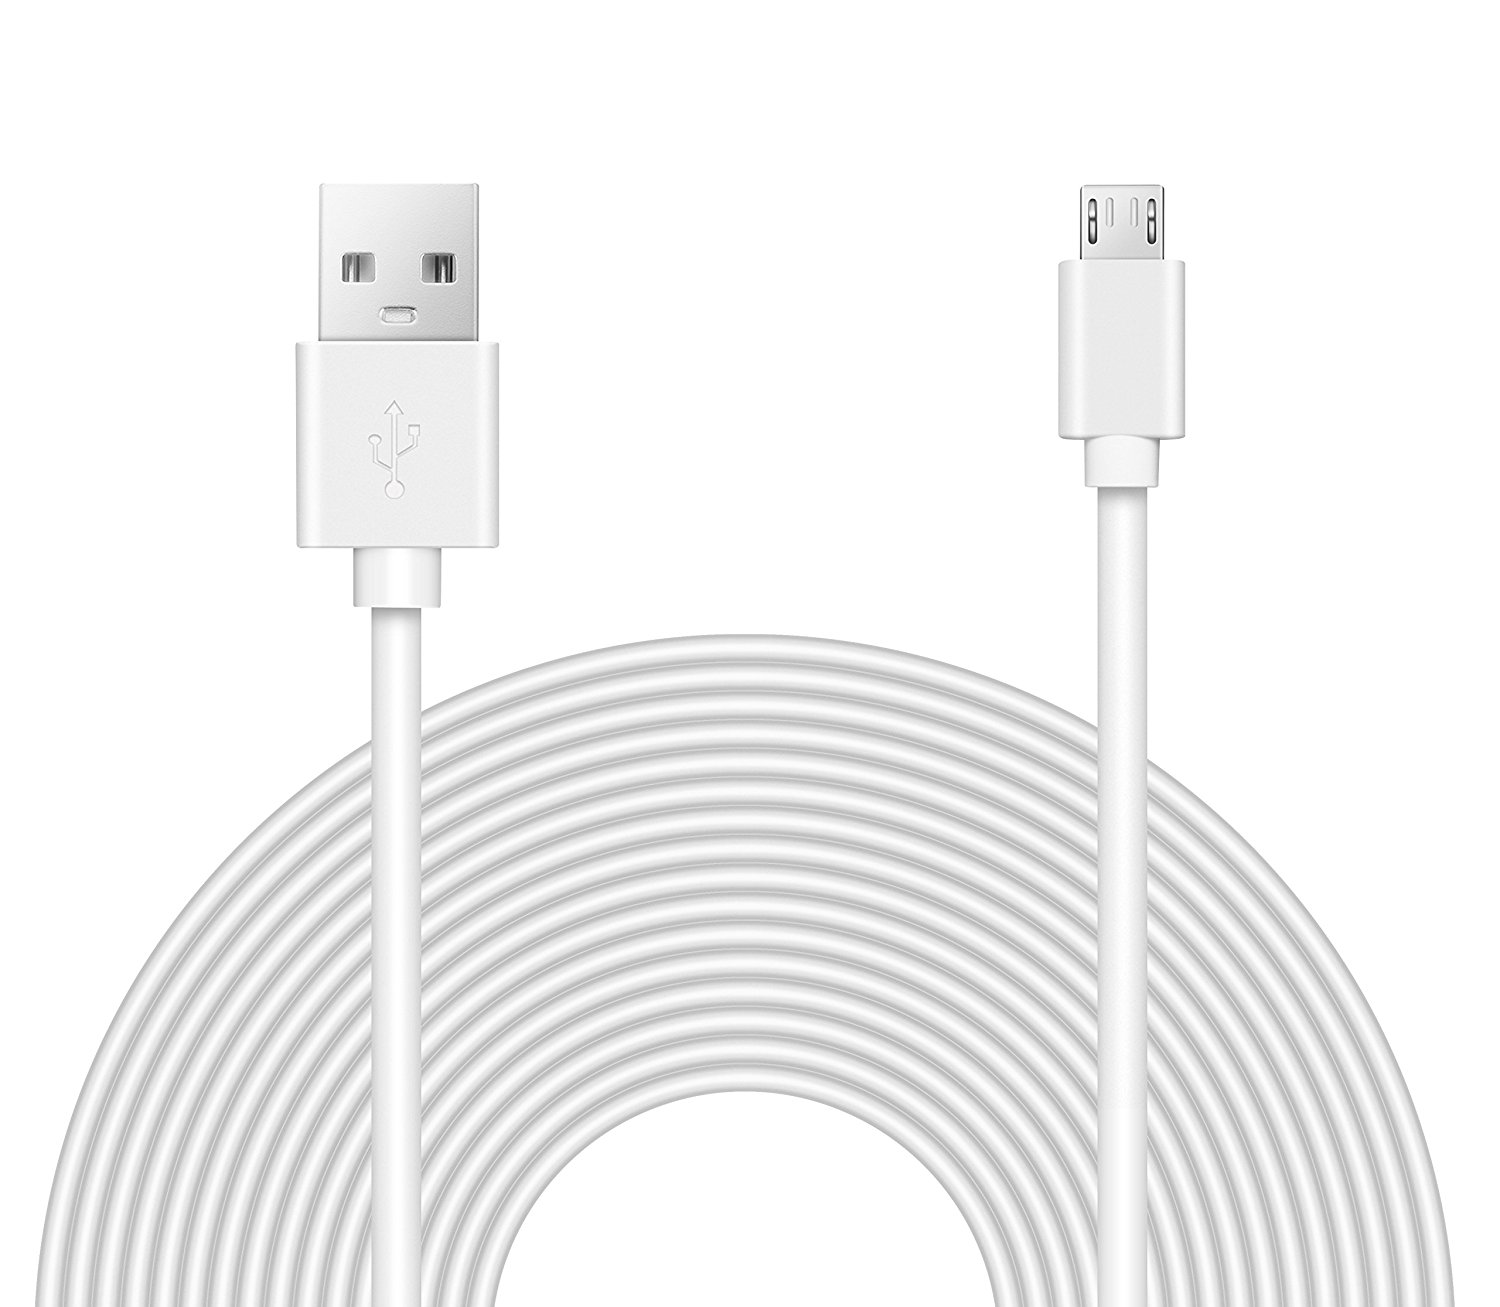 OMNIHIL (32FT) 2.0 High Speed USB Cable for Sony SRSX2 Ultra-Portable NFC Bluetooth Wireless Speaker (White) with Speakerphone - WHITE - image 1 of 2